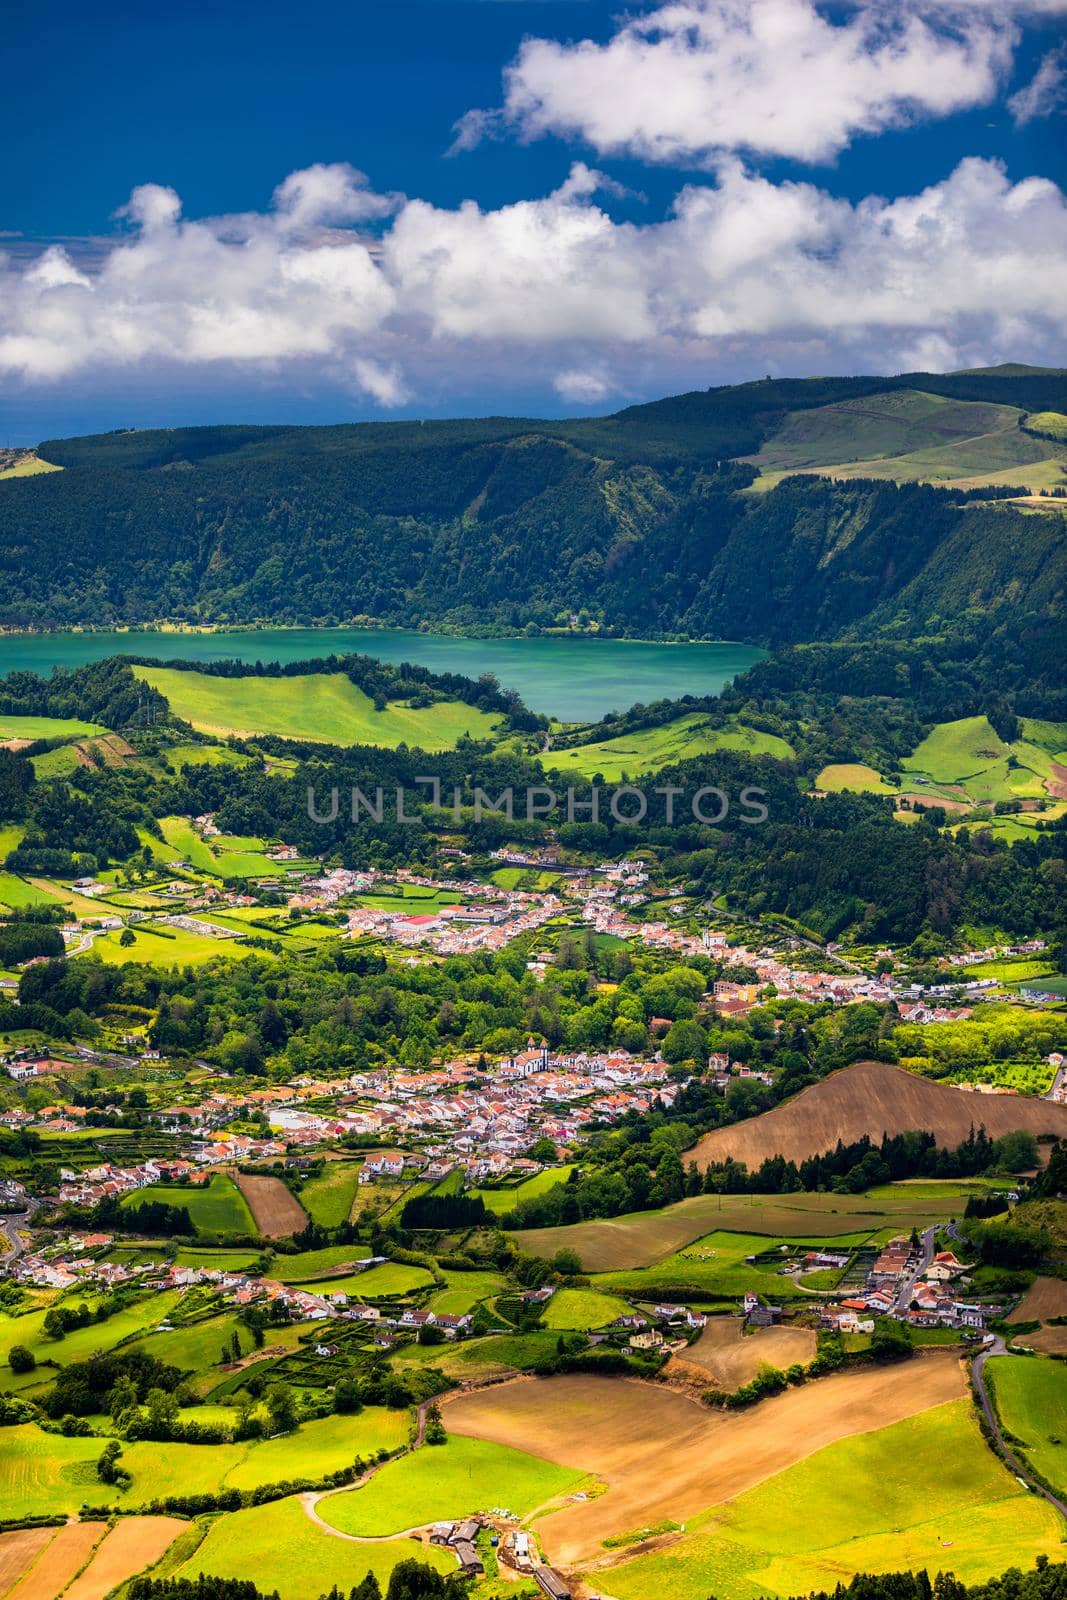 View of Furnas town and lake (Lagoa das Furnas) on Sao Miguel Island, Azores, Portugal from the Miradouro do Salto do Cavalo viewpoint. A tranquil scene of lush foliage and town in a volcanic crater